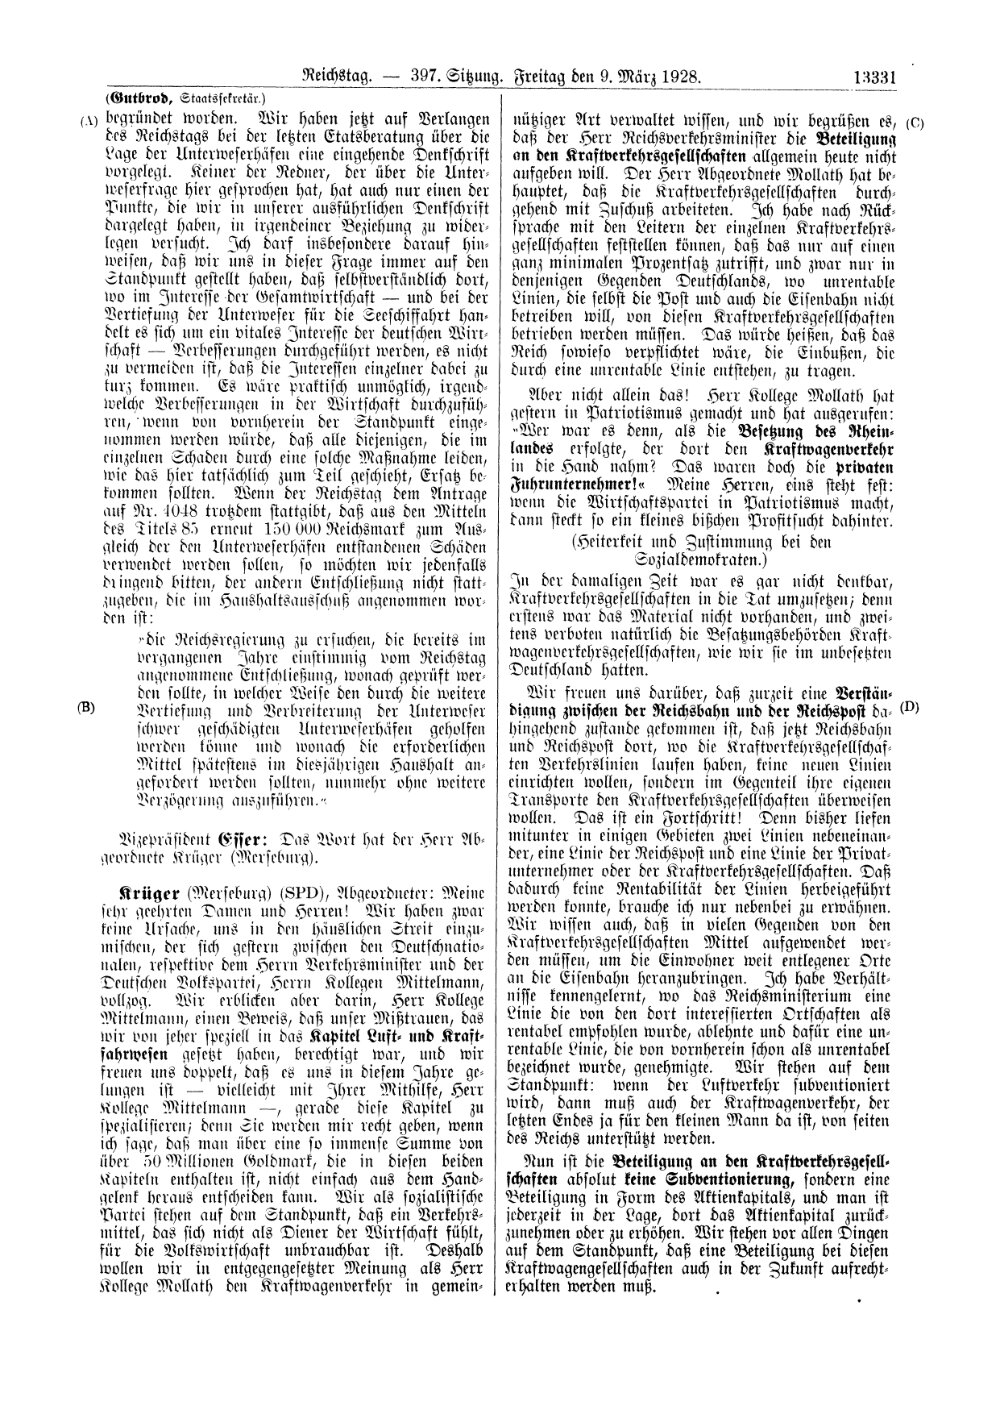 Scan of page 13331